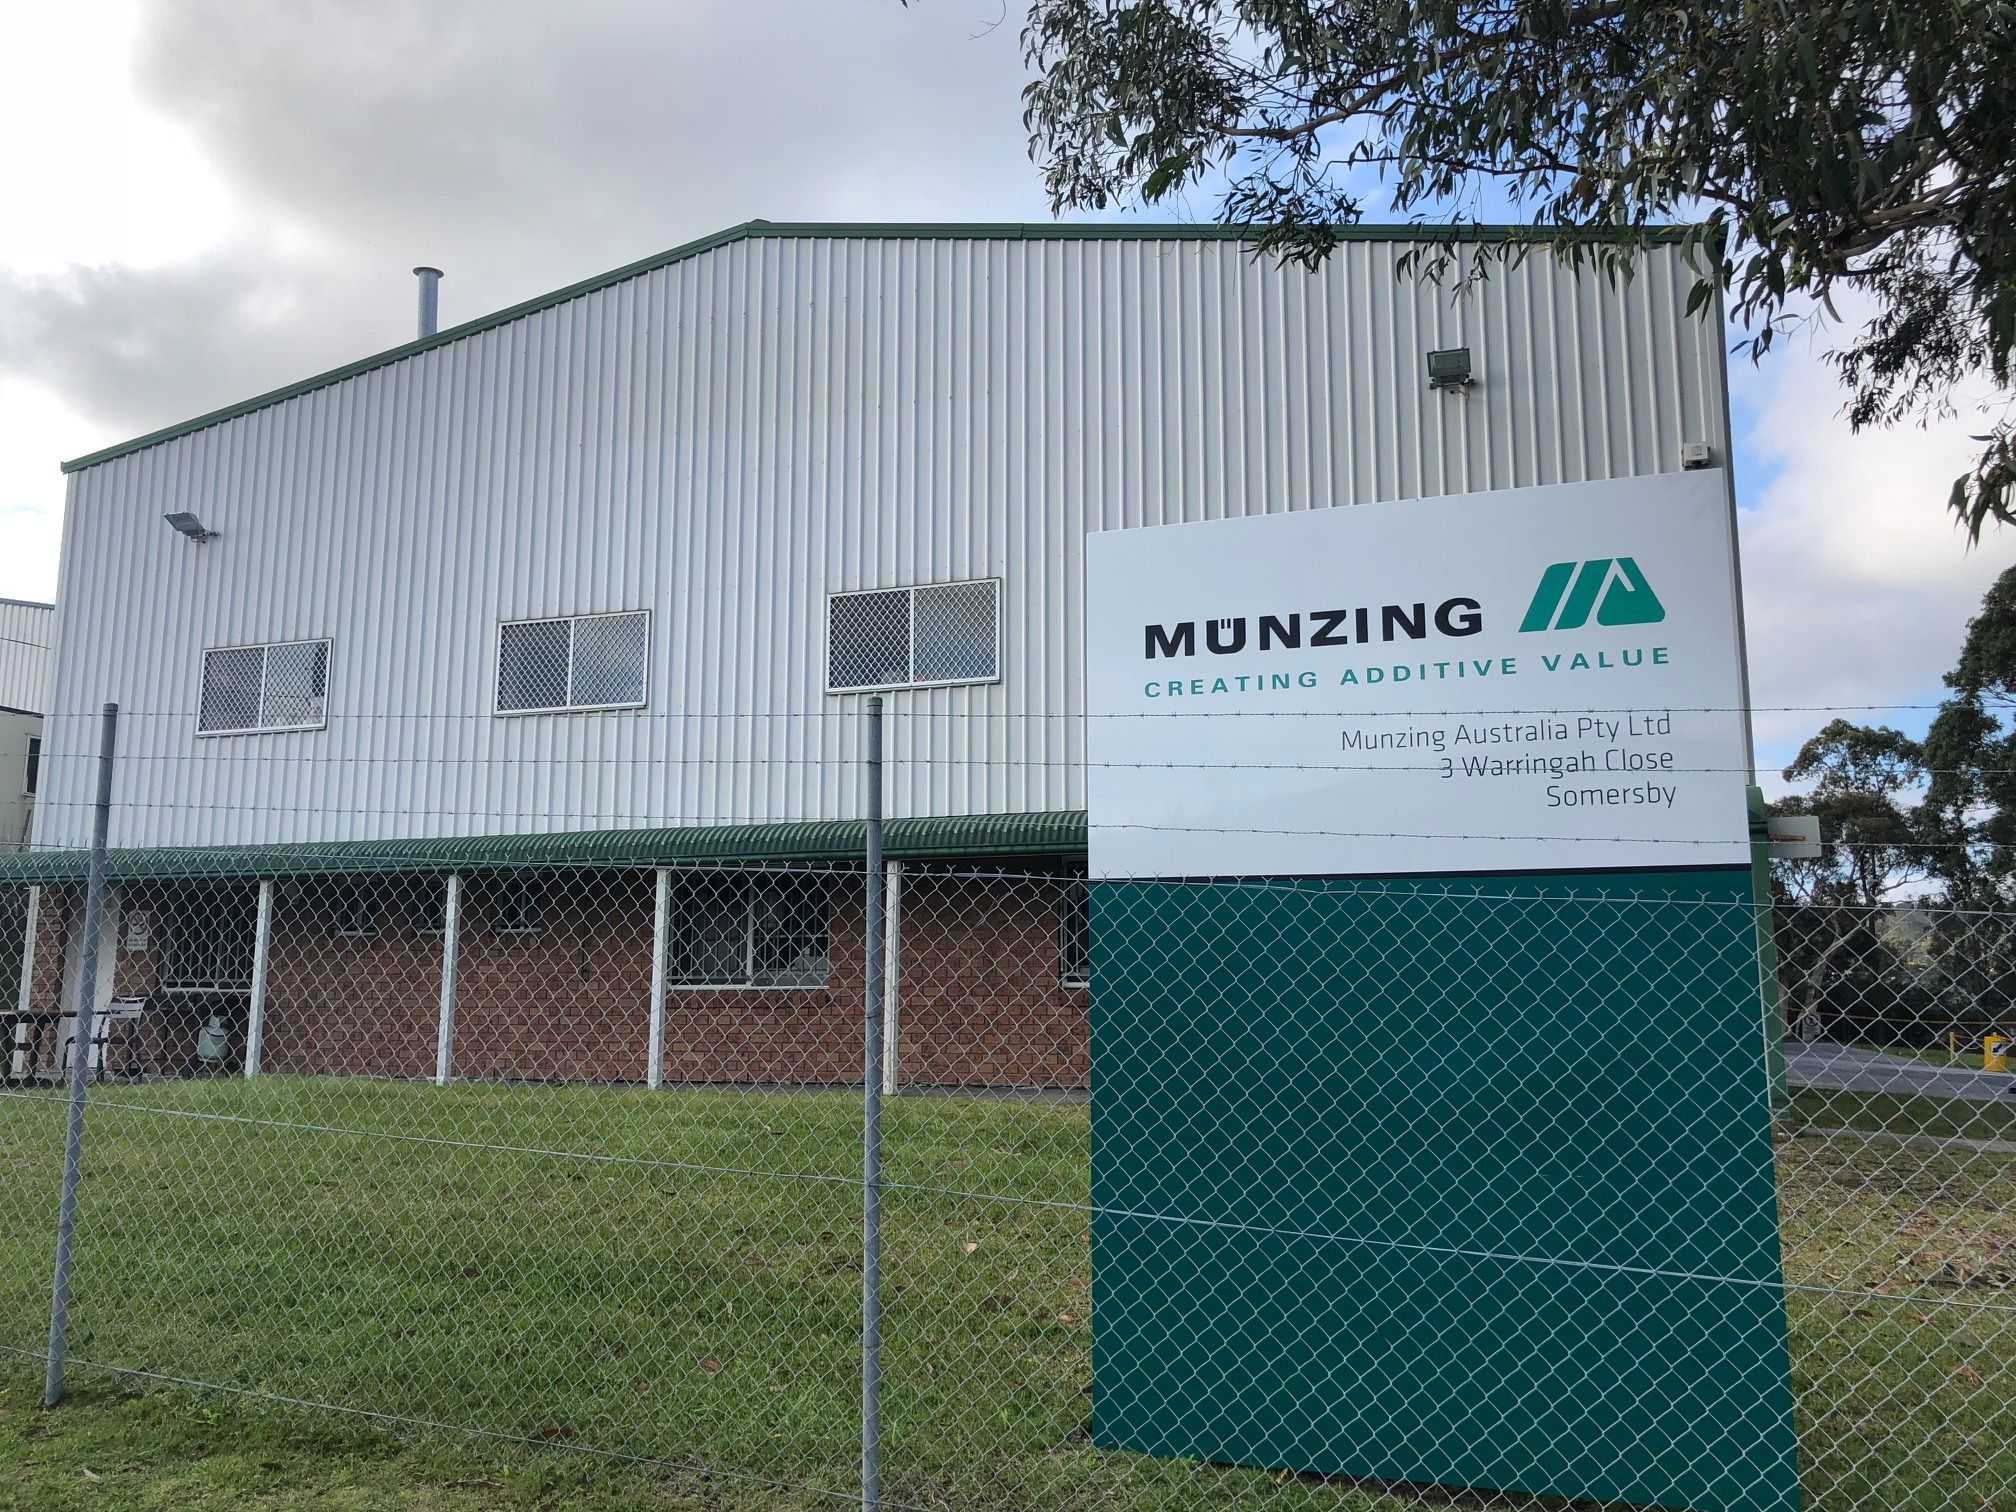 MÜNZING Australia Pty. Ltd. is located in Somersby, New South Wales, one hour north of Sydney. The purpose-built factory site was built in 1993 by the FENTAK® company, which was acquired by MÜNZING in 2018, and today is a center of excellence for manufacturing, research and development, sales, warehousing and distribution. The 1500 sq m facility is located on half a hectare of land which includes Australian native bushland as well as the occasional kangaroo. The site has a solar farm that provides more than 100% of the power required for all daytime activities including production. The excess power is supplied back into the electricity grid.
The site produces the entire range of FENTAK® products for the FPA division. These include catalysts and hardeners, release agents, wetting agents, pigment dispersions, wax emulsions, putties, coatings, and sealants as well as many specialty products. The R&D facilities include specialized equipment such as a laboratory press for making pilot-scale particleboard, medium-density fibreboard and plywood. There is also a laboratory-scale paper treater to produce low-pressure and high-pressure laminates and overlays. The highly trained and experienced technical staff are leaders in their fields of research and development for wood panels and laminates and can provide technical assistance to their customers on a wide range of issues.